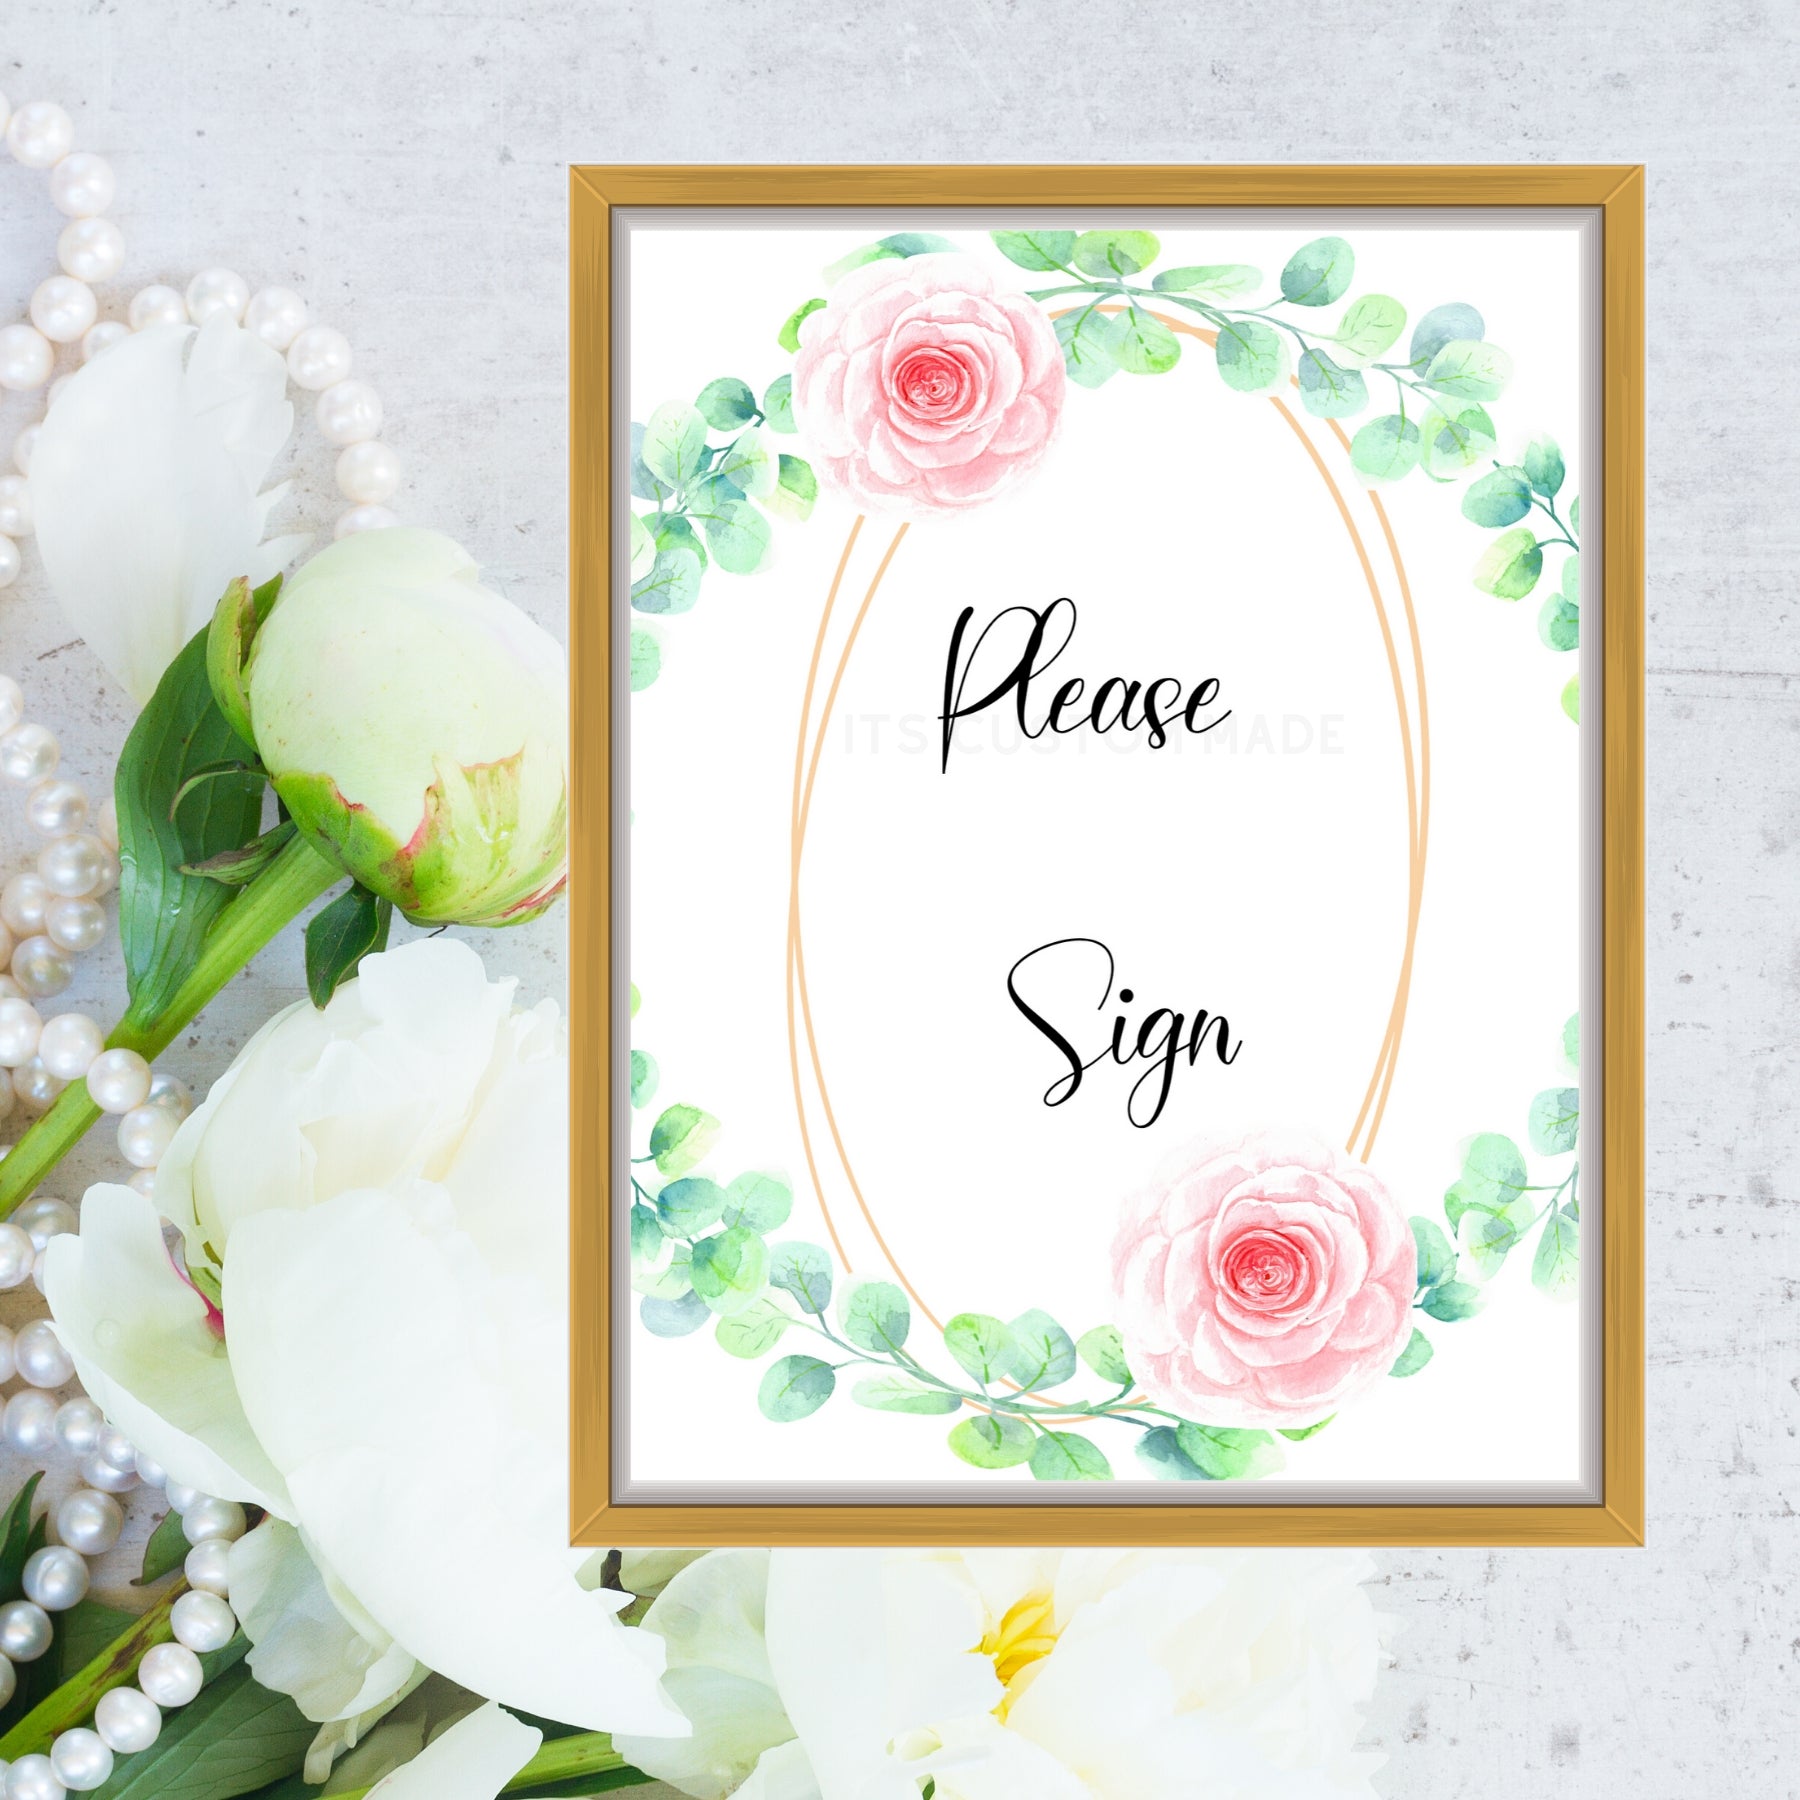 Please Sign Our Guest Book Party Decor Printable Sign - Baby Shower Guest Book Party Decor Sign - Greenery Wall Art Decorations - Green & White Baby Shower Wall Art - Neutral Baby Shower Decor Printable